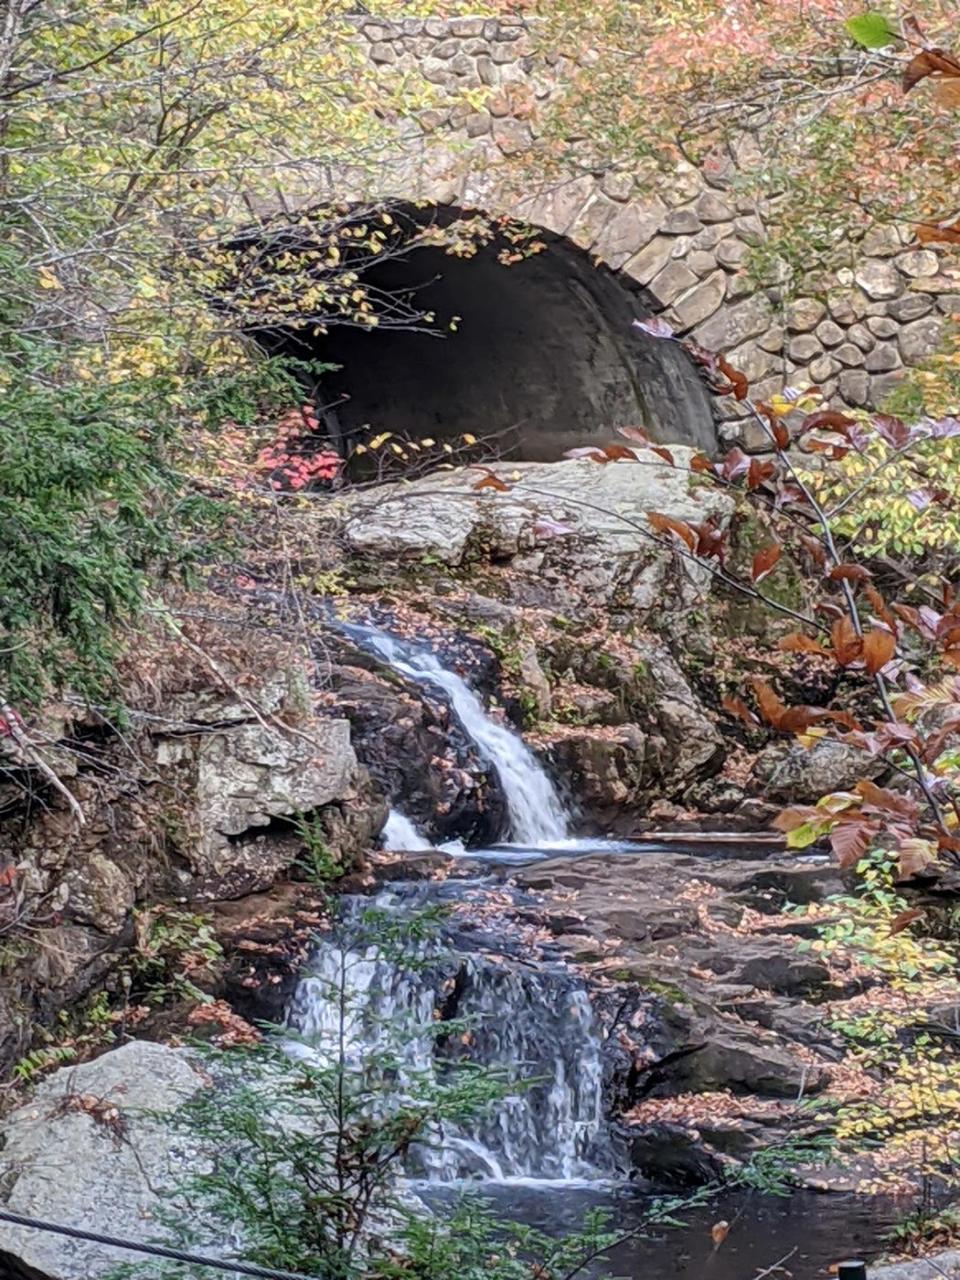 Doane's Falls in Royalston is a popular destination for hikers due to the picturesque stone bridge and the series of waterfalls.